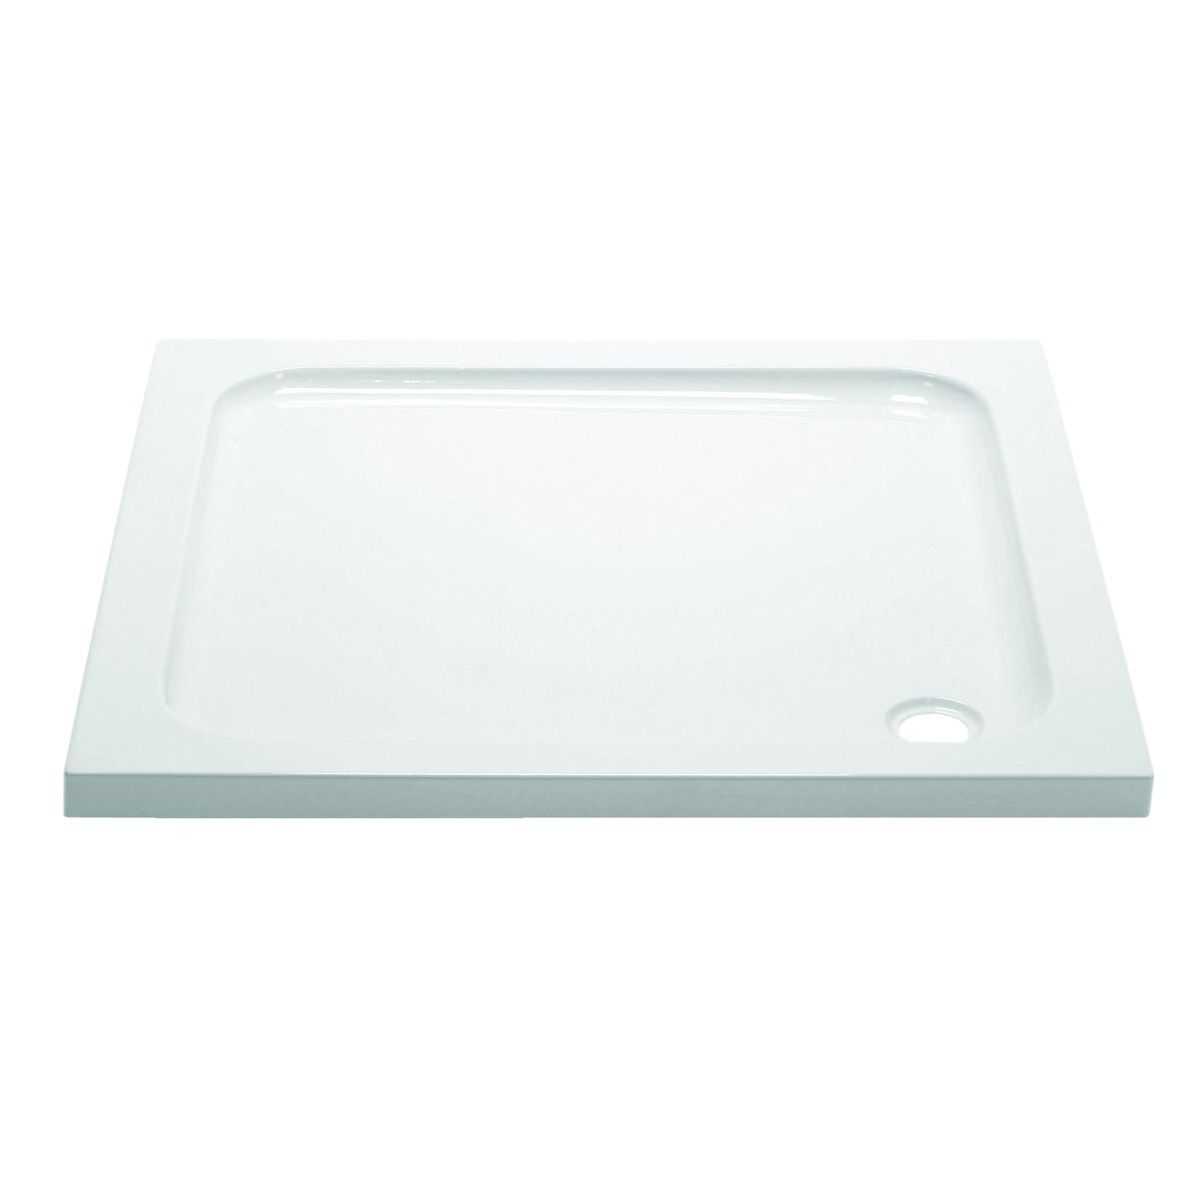 Image of Wickes White Slimline Square Cast Stone Shower Tray -760mm X 760mm